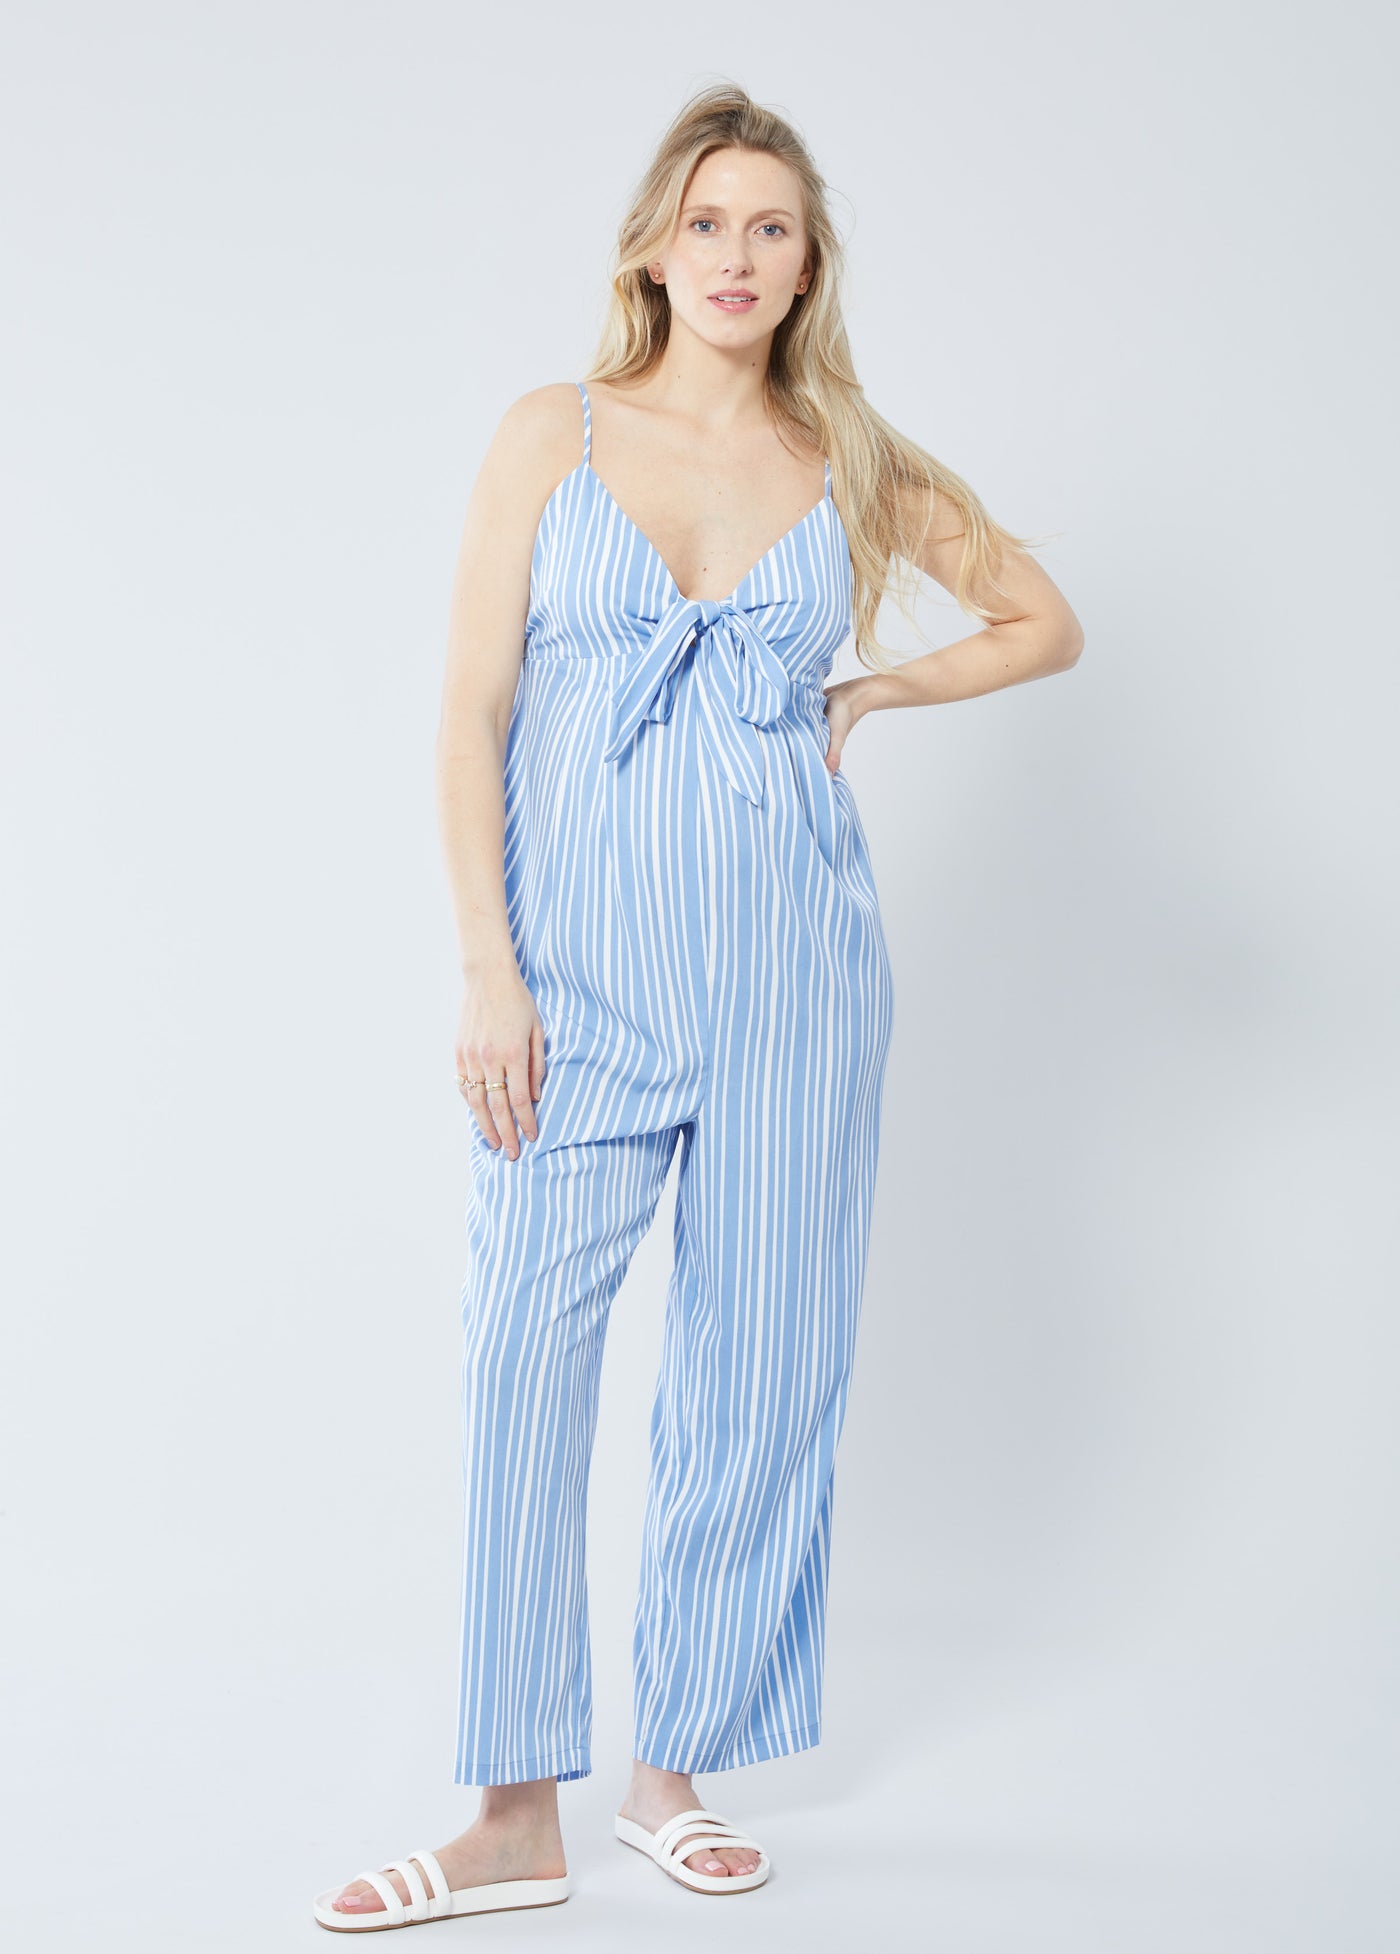 Silja is 5'9", 8 months pregnant and wearing a size small||Cabana Stripe